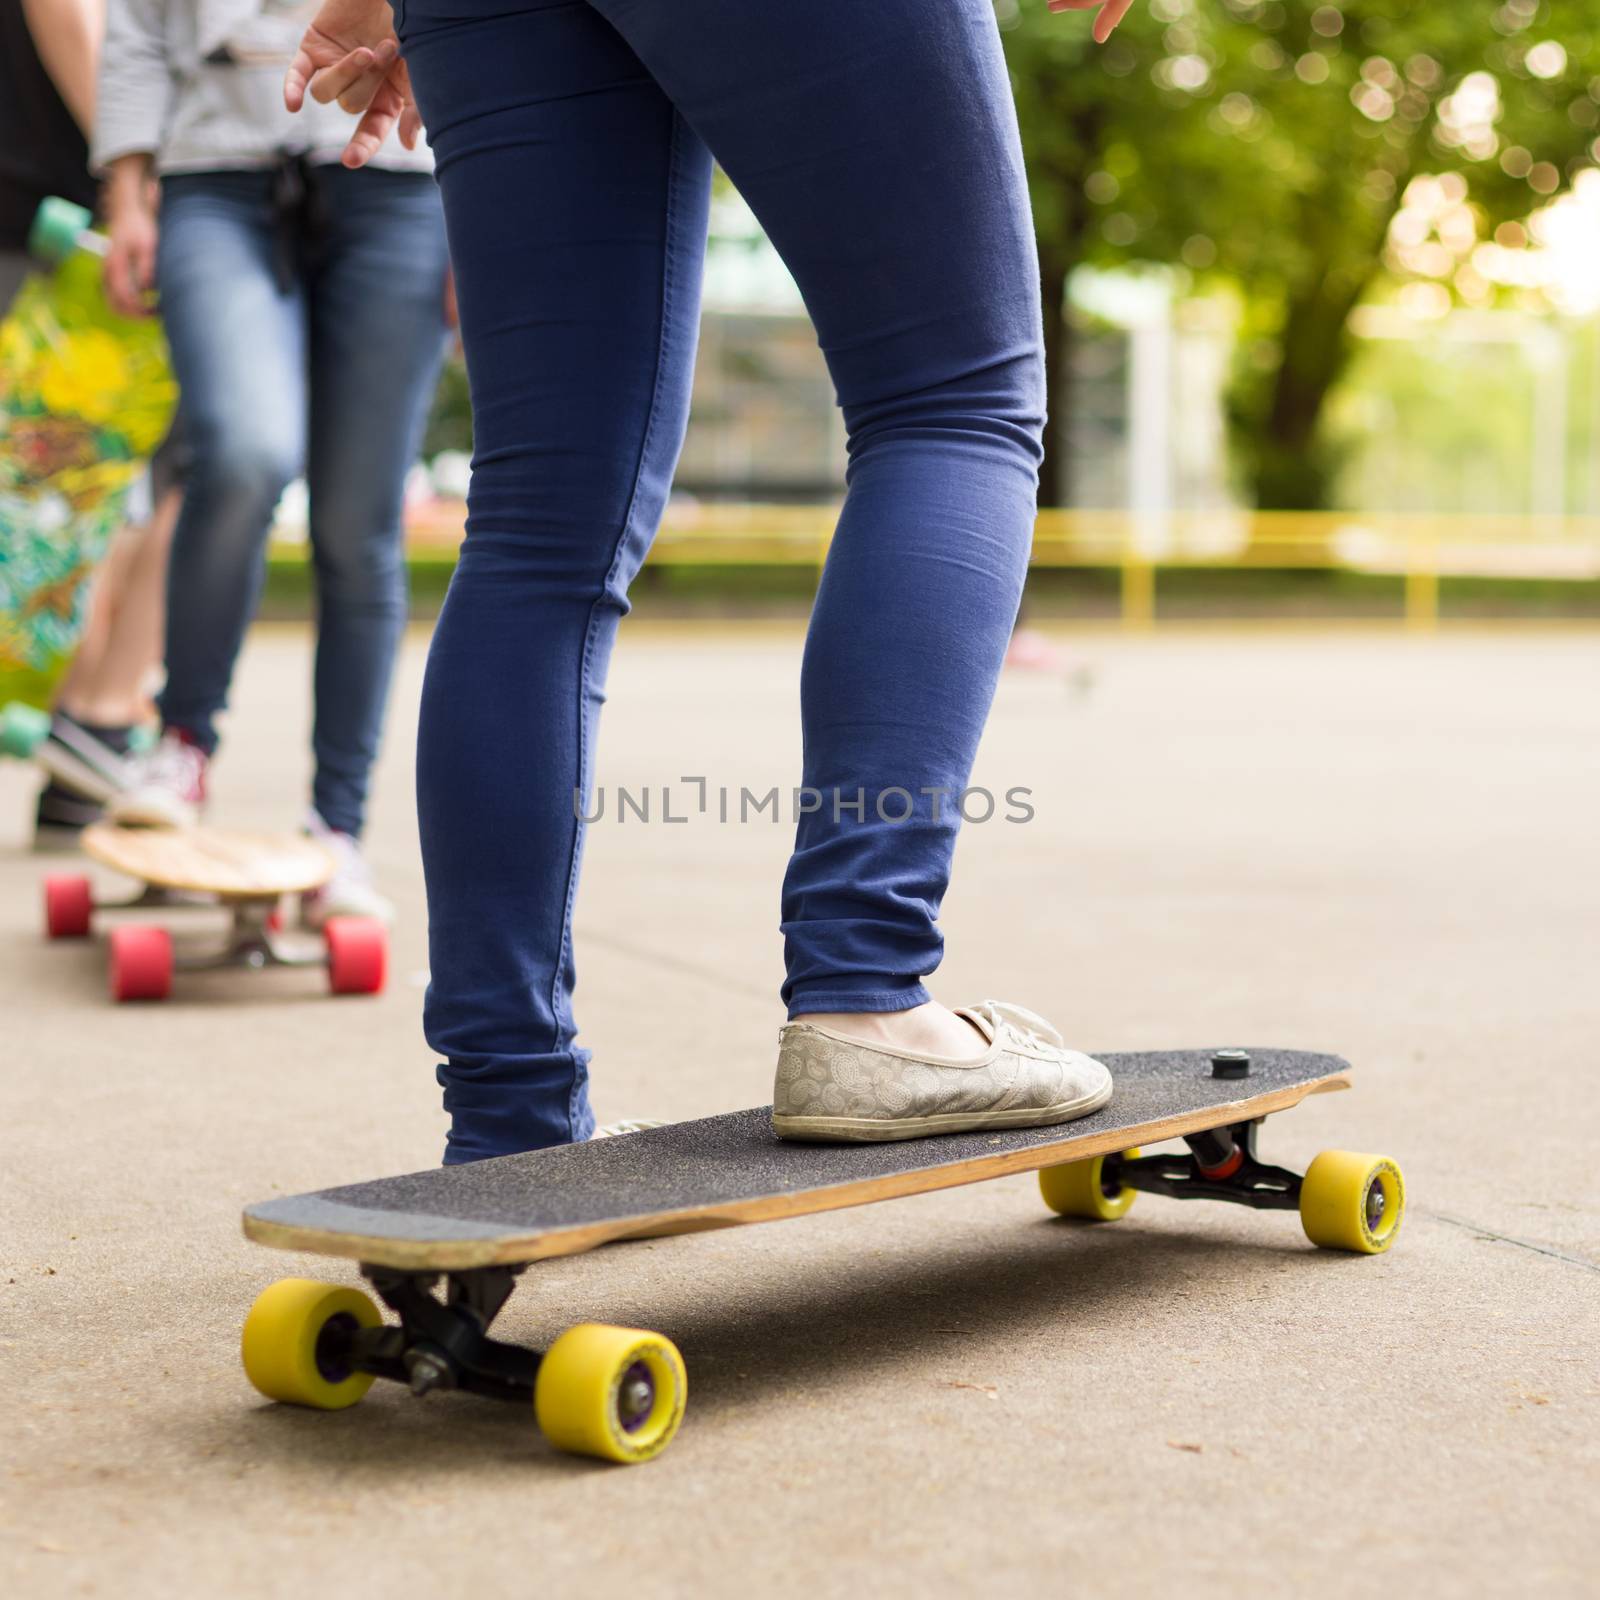 Teenage girl wearing blue jeans and sneakers practicing long board riding in skateboarding park. Active urban life. Urban subculture.